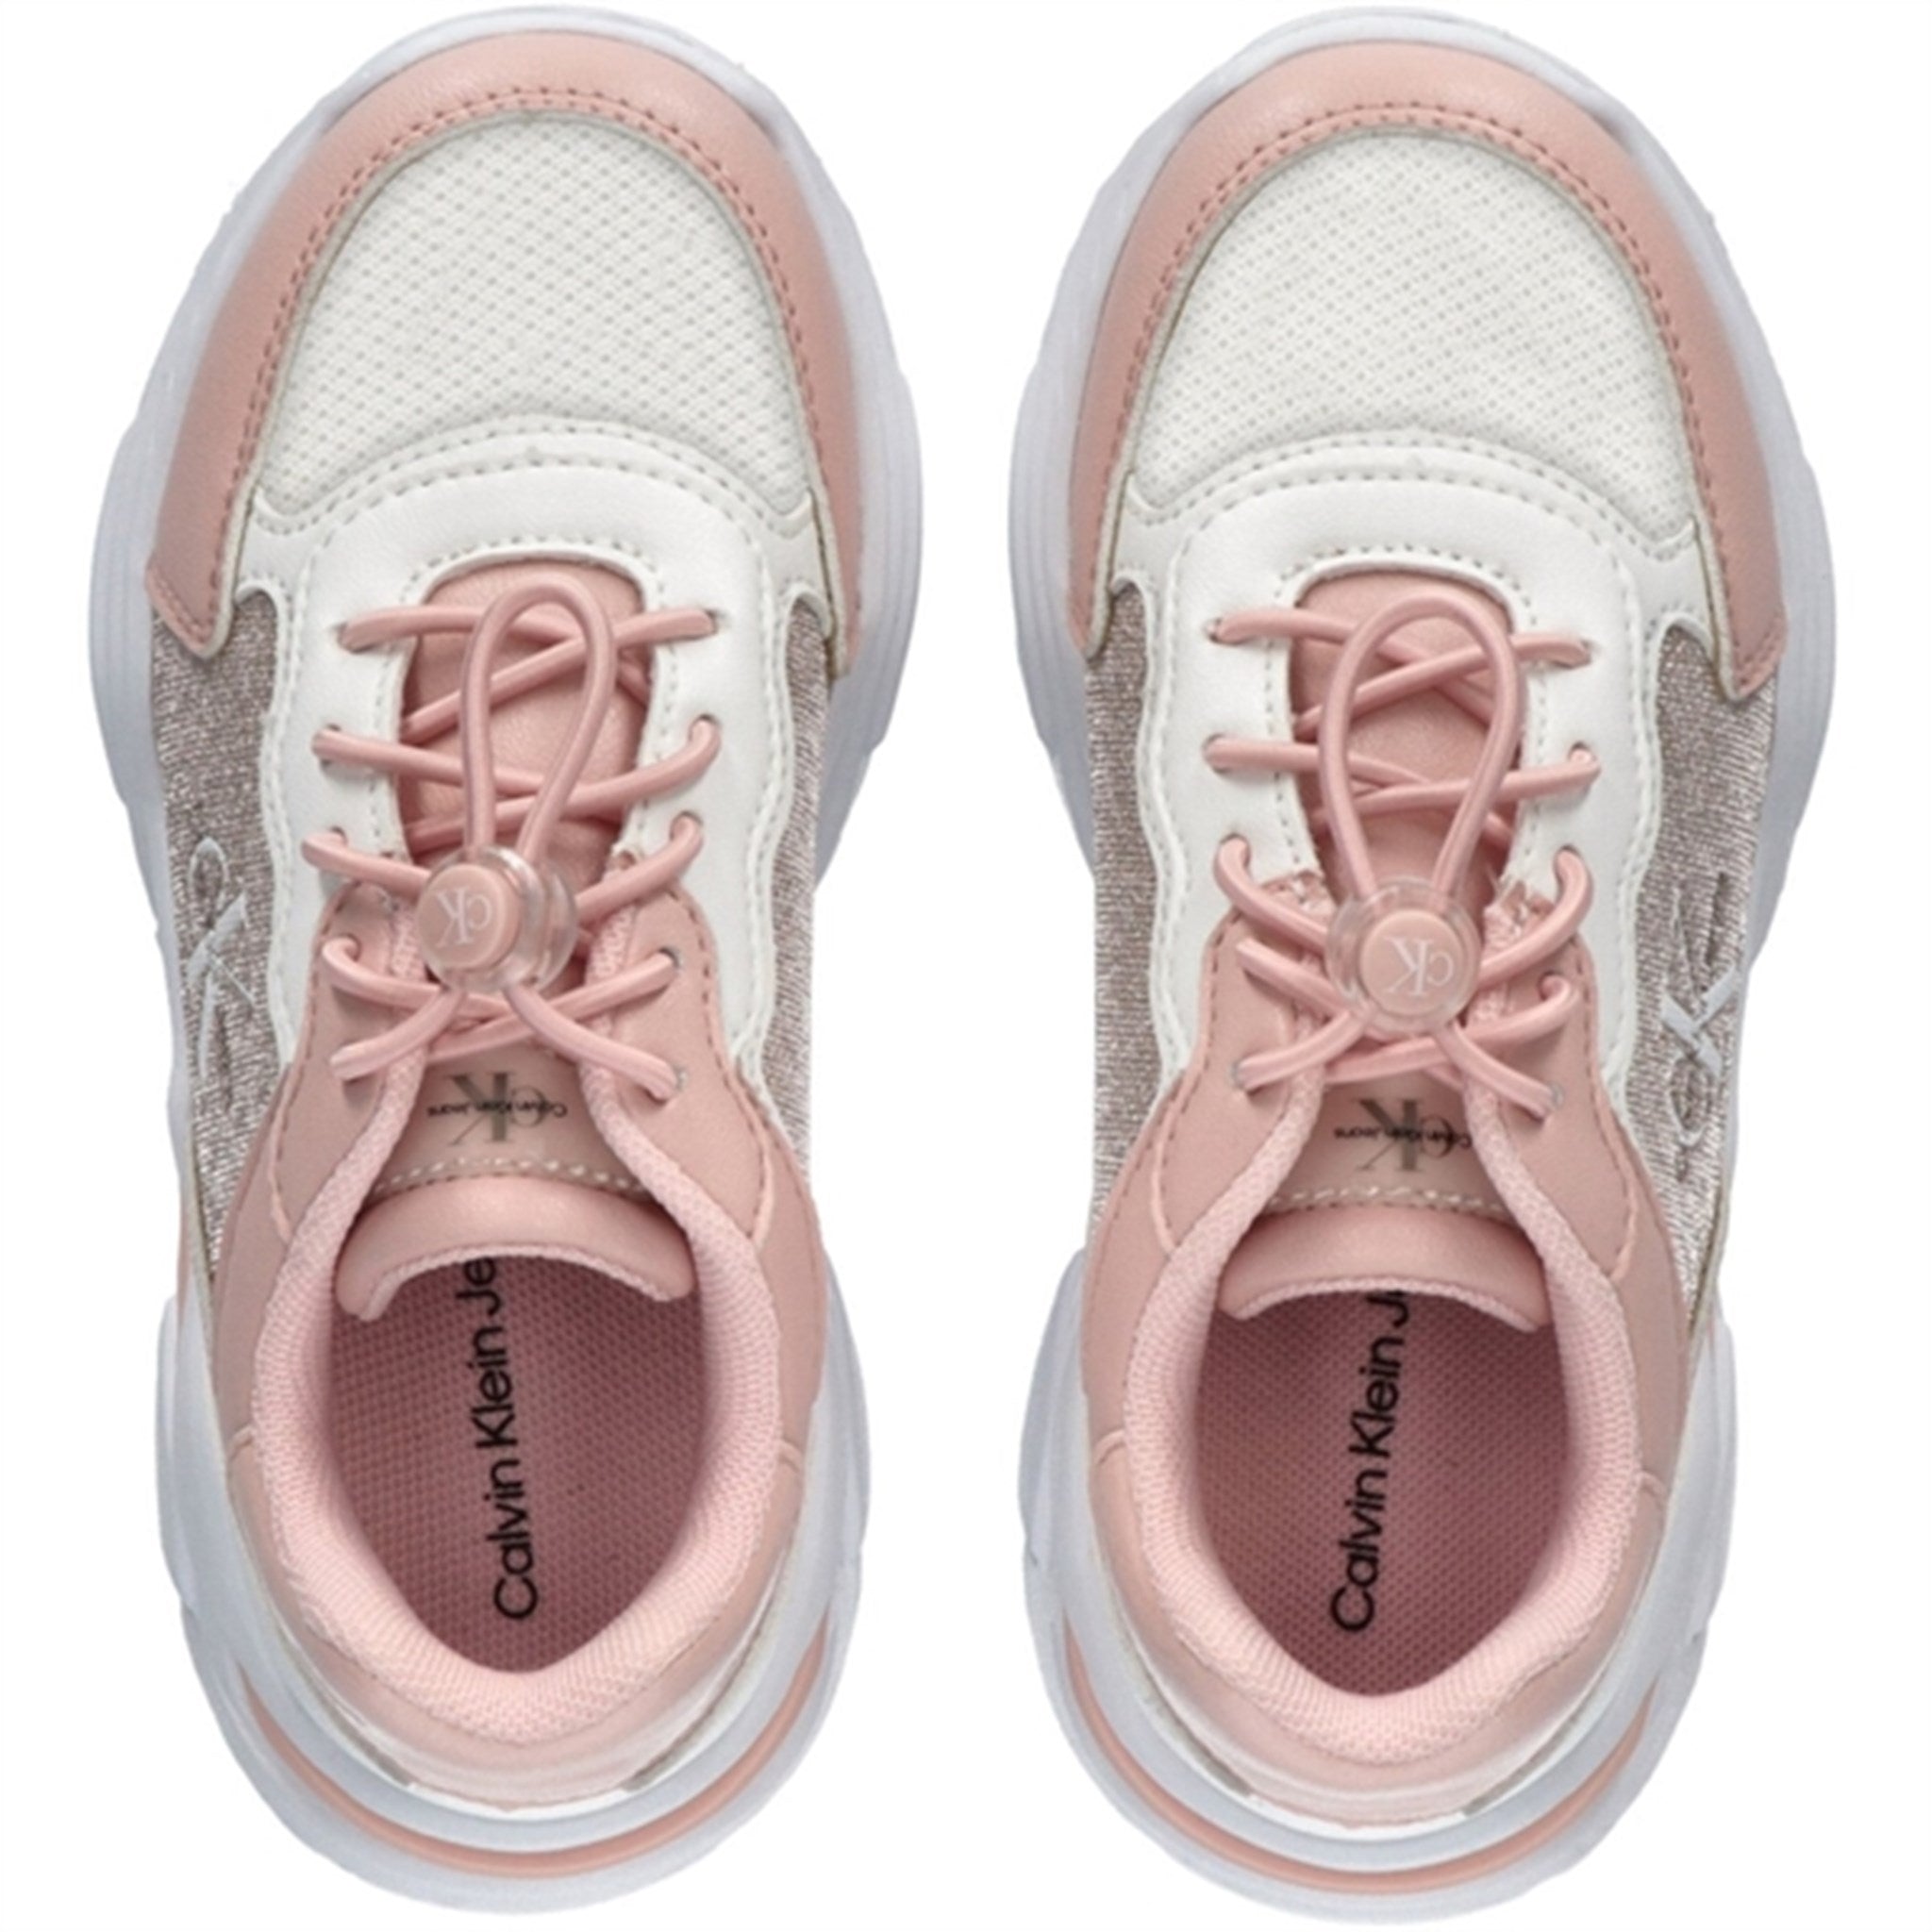 Calvin Klein Low Cut Lace-Up Sneakers Pink/White